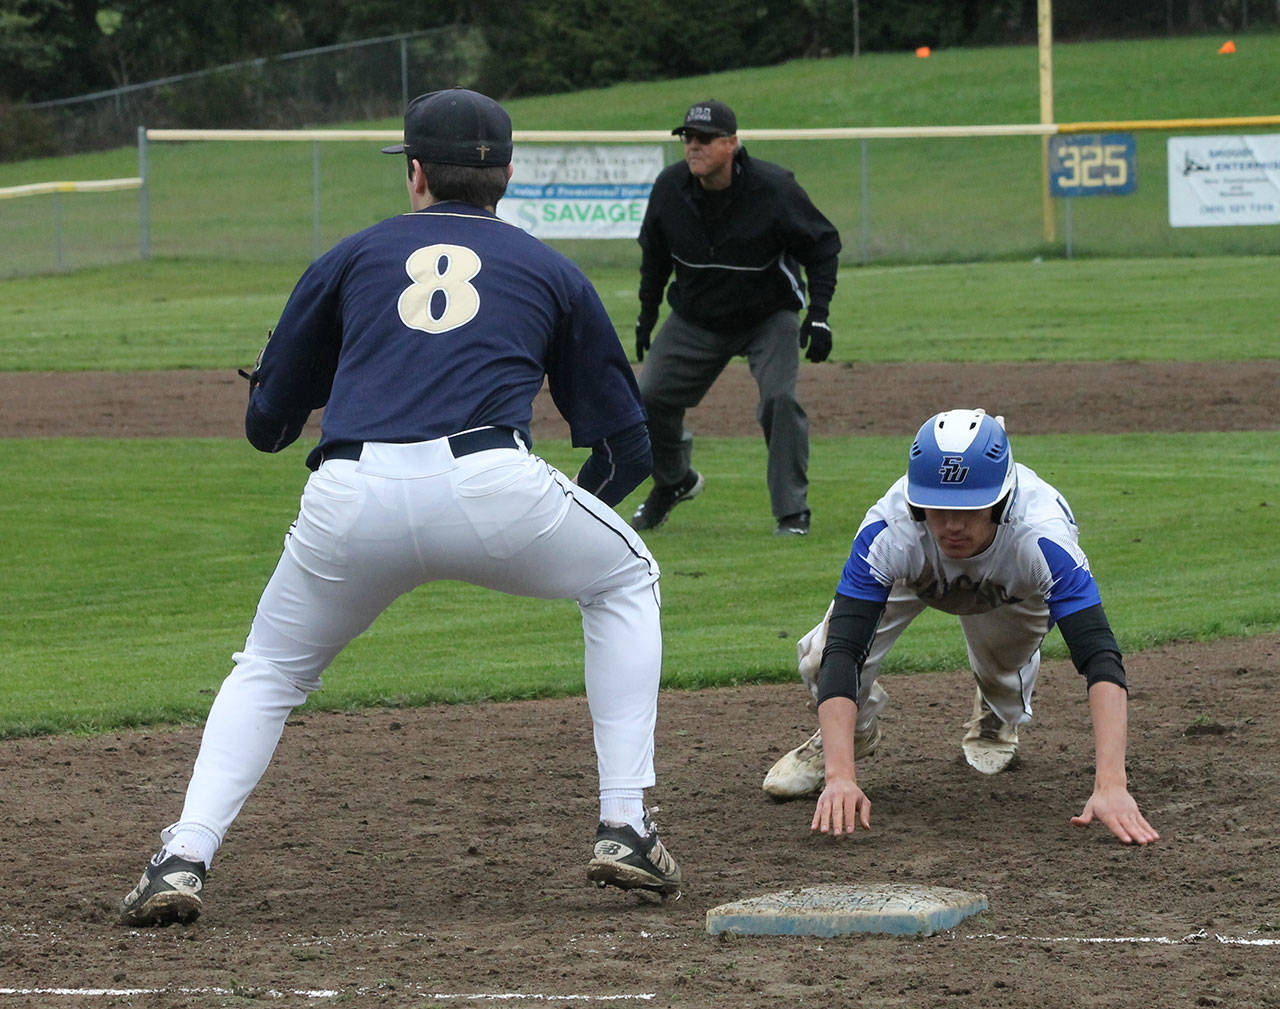 South Whidbey’s Alex Black dives safely back into first base. (Photo by Jim Waller/South Whidbey Record)